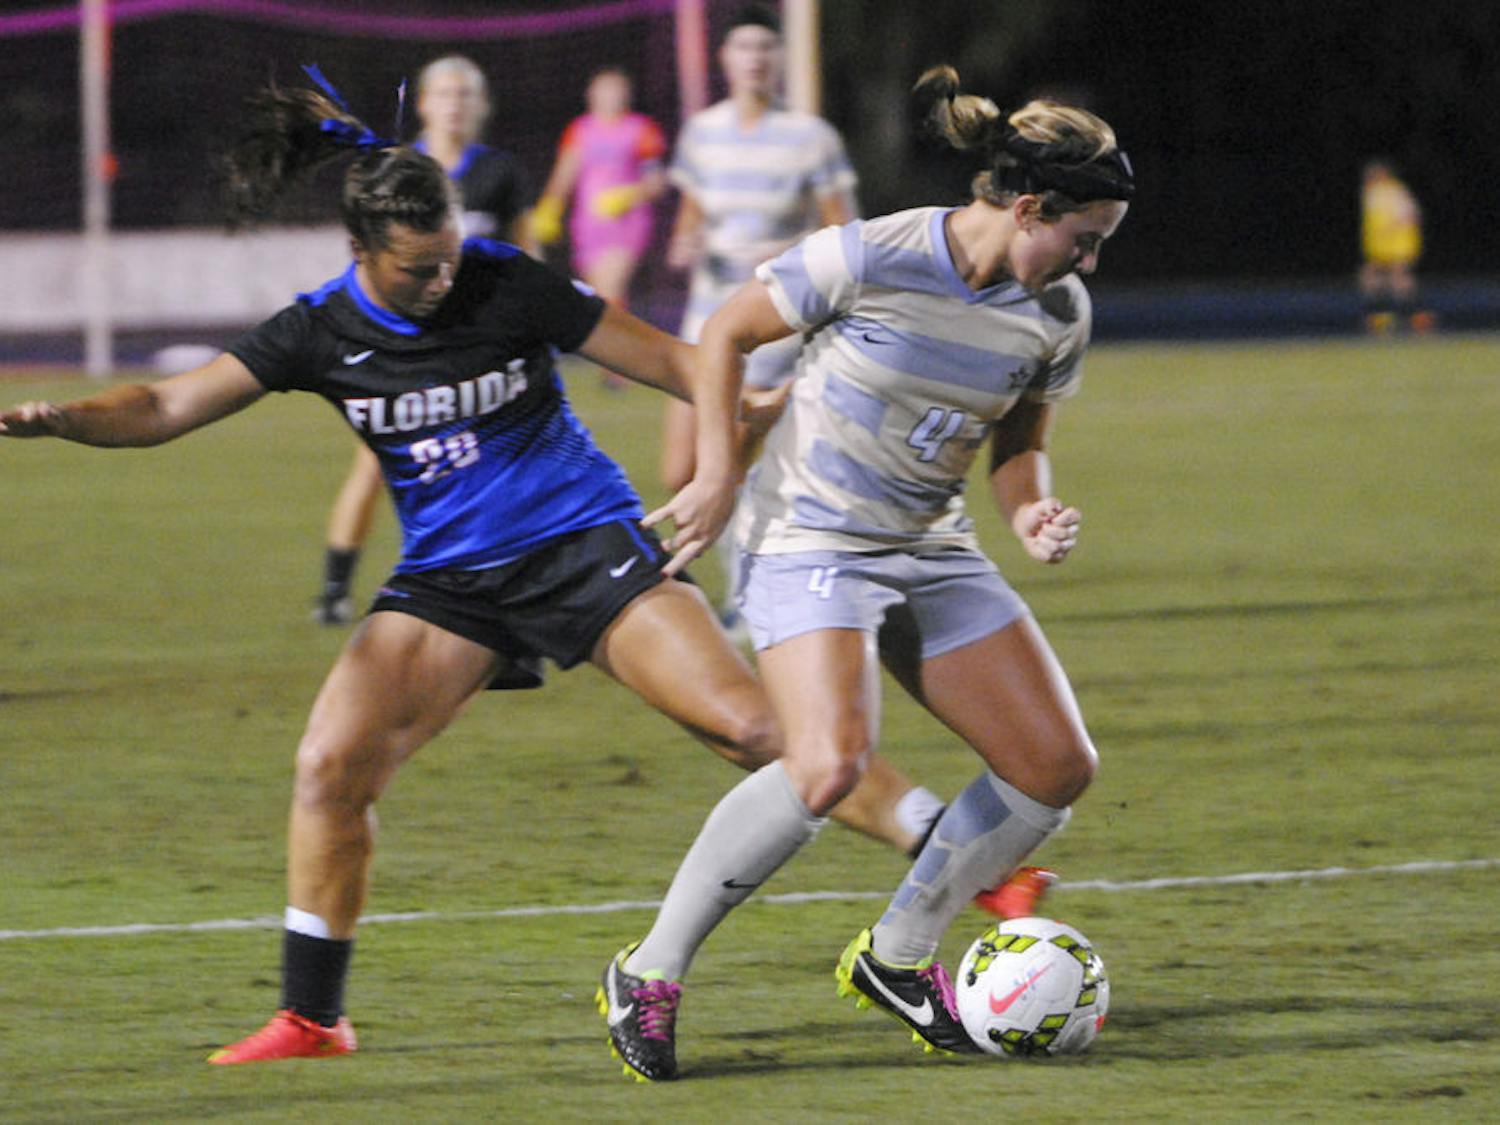 Meggie Dougherty Howard attempts to get the ball from a Vanderbilt player during UF's 6-1 win on Thursday.